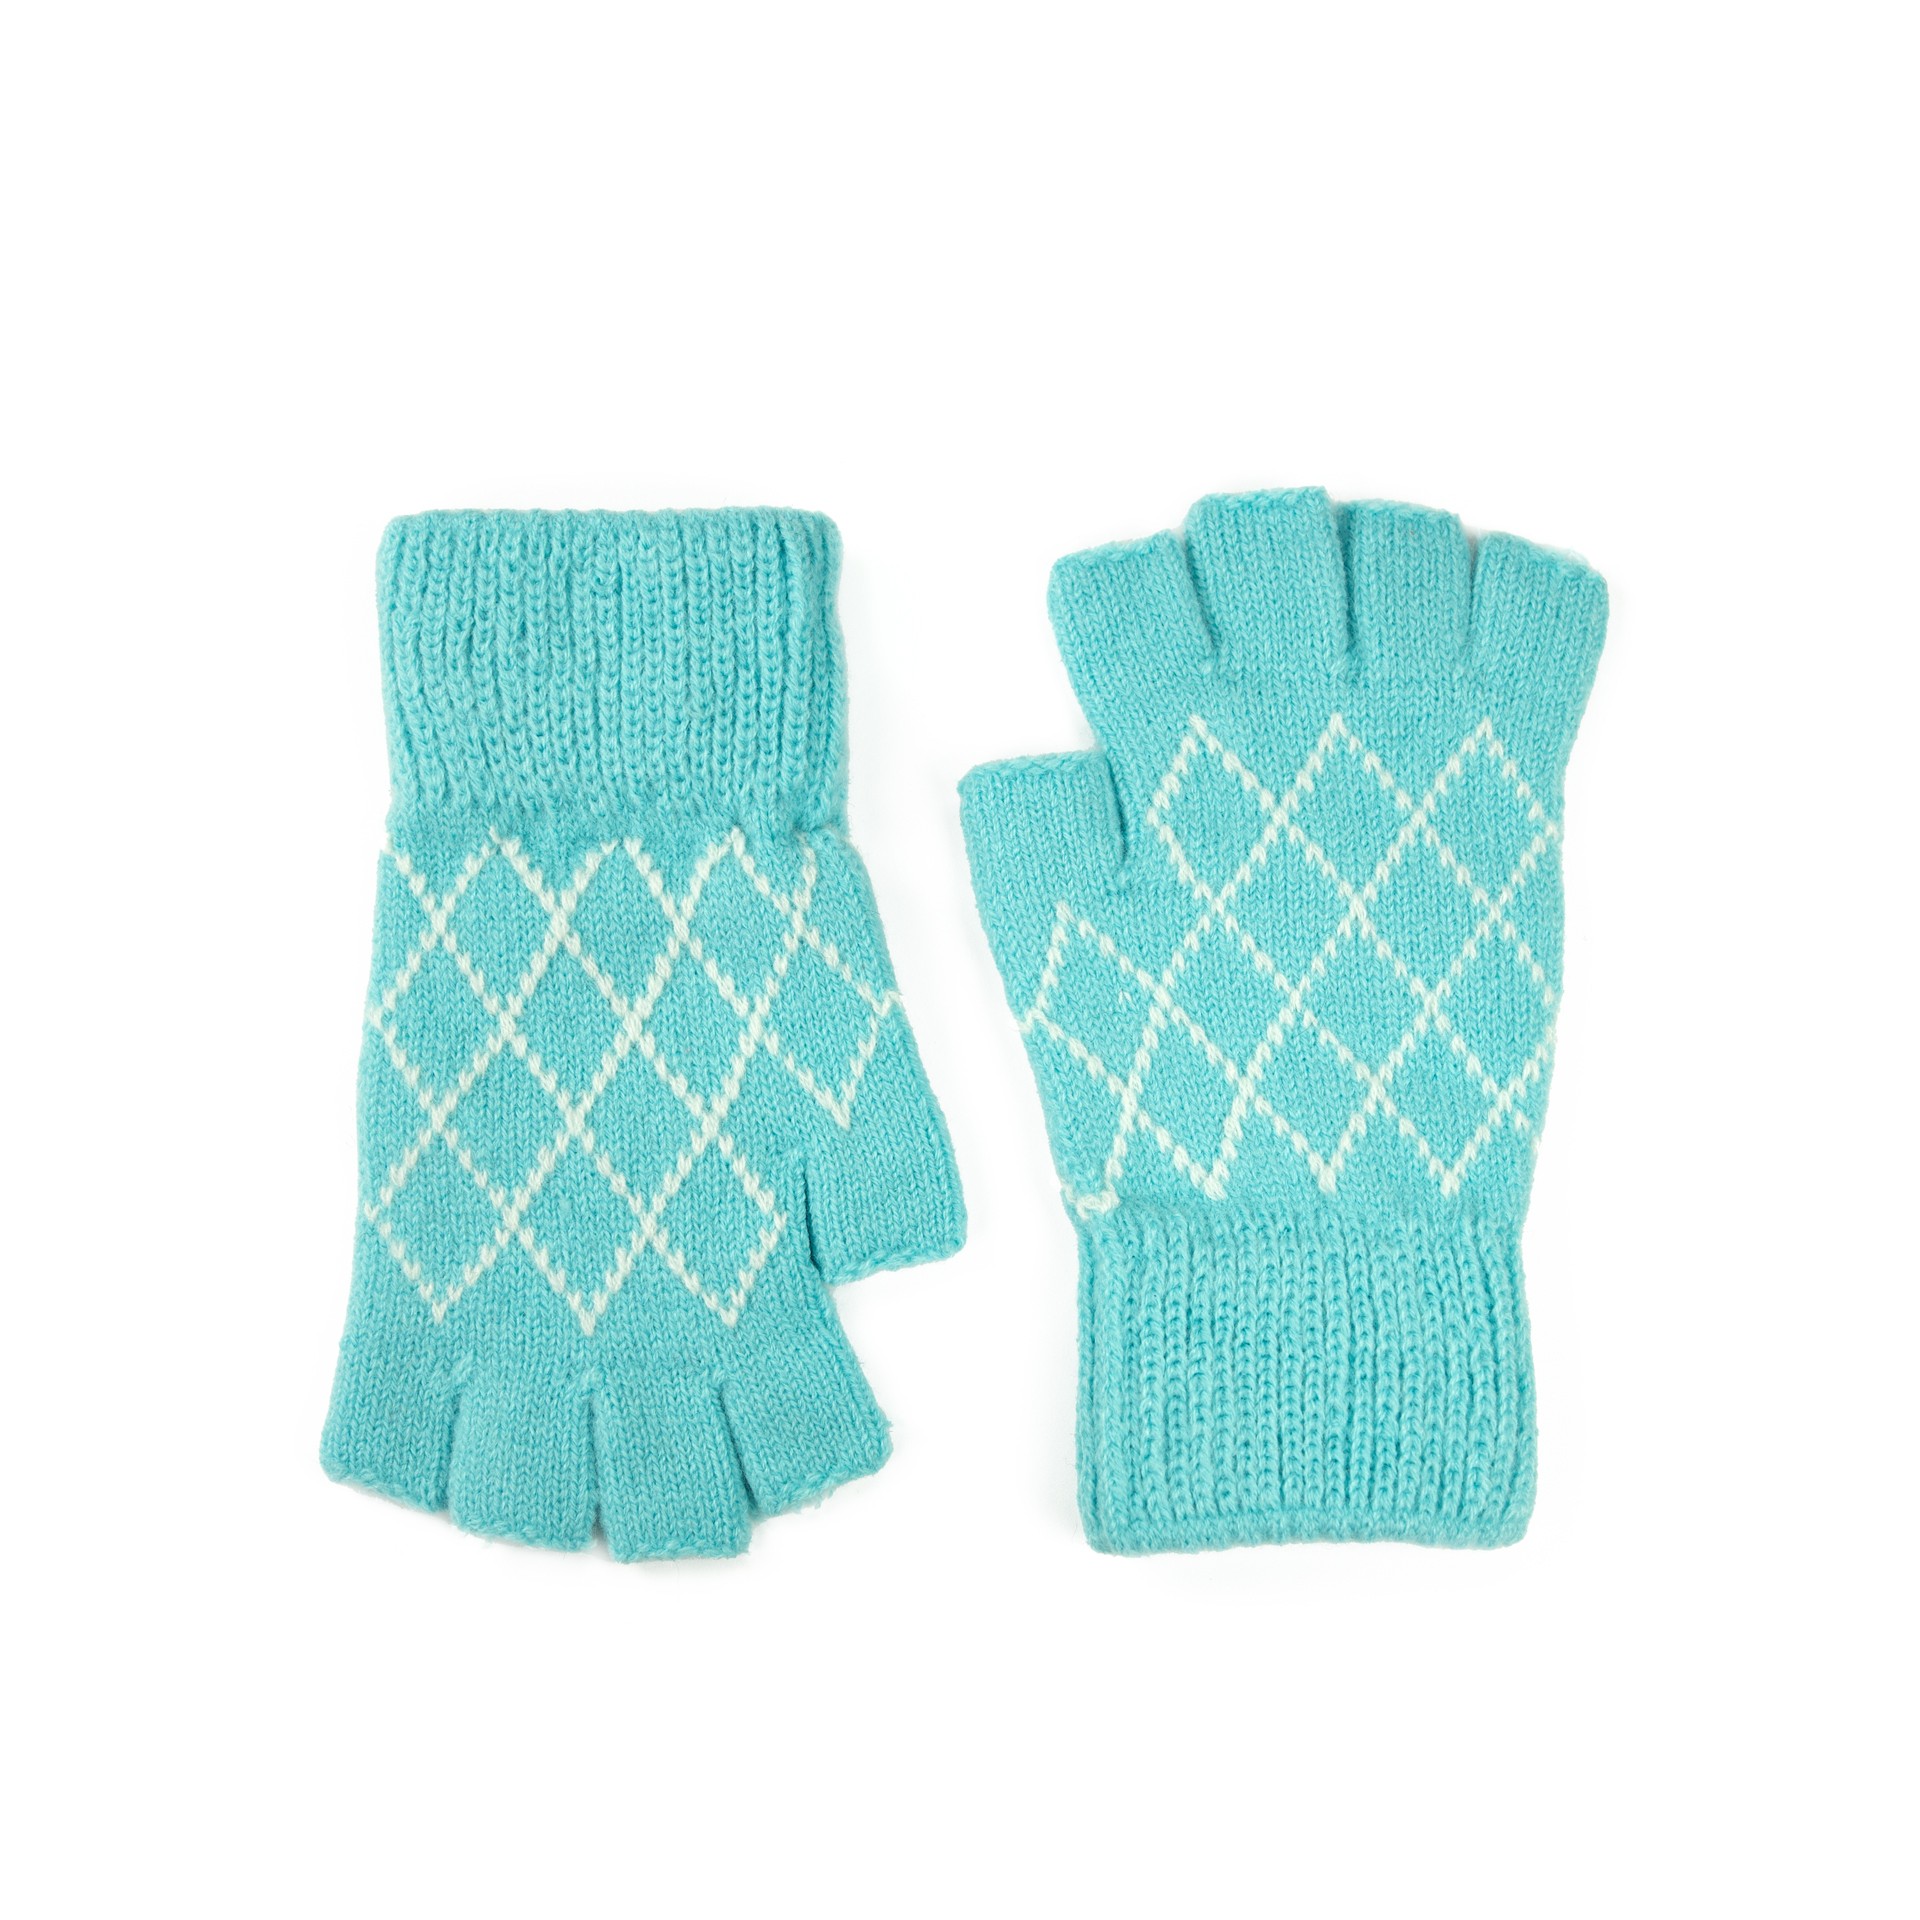 Art Of Polo Woman's Gloves Rk22241